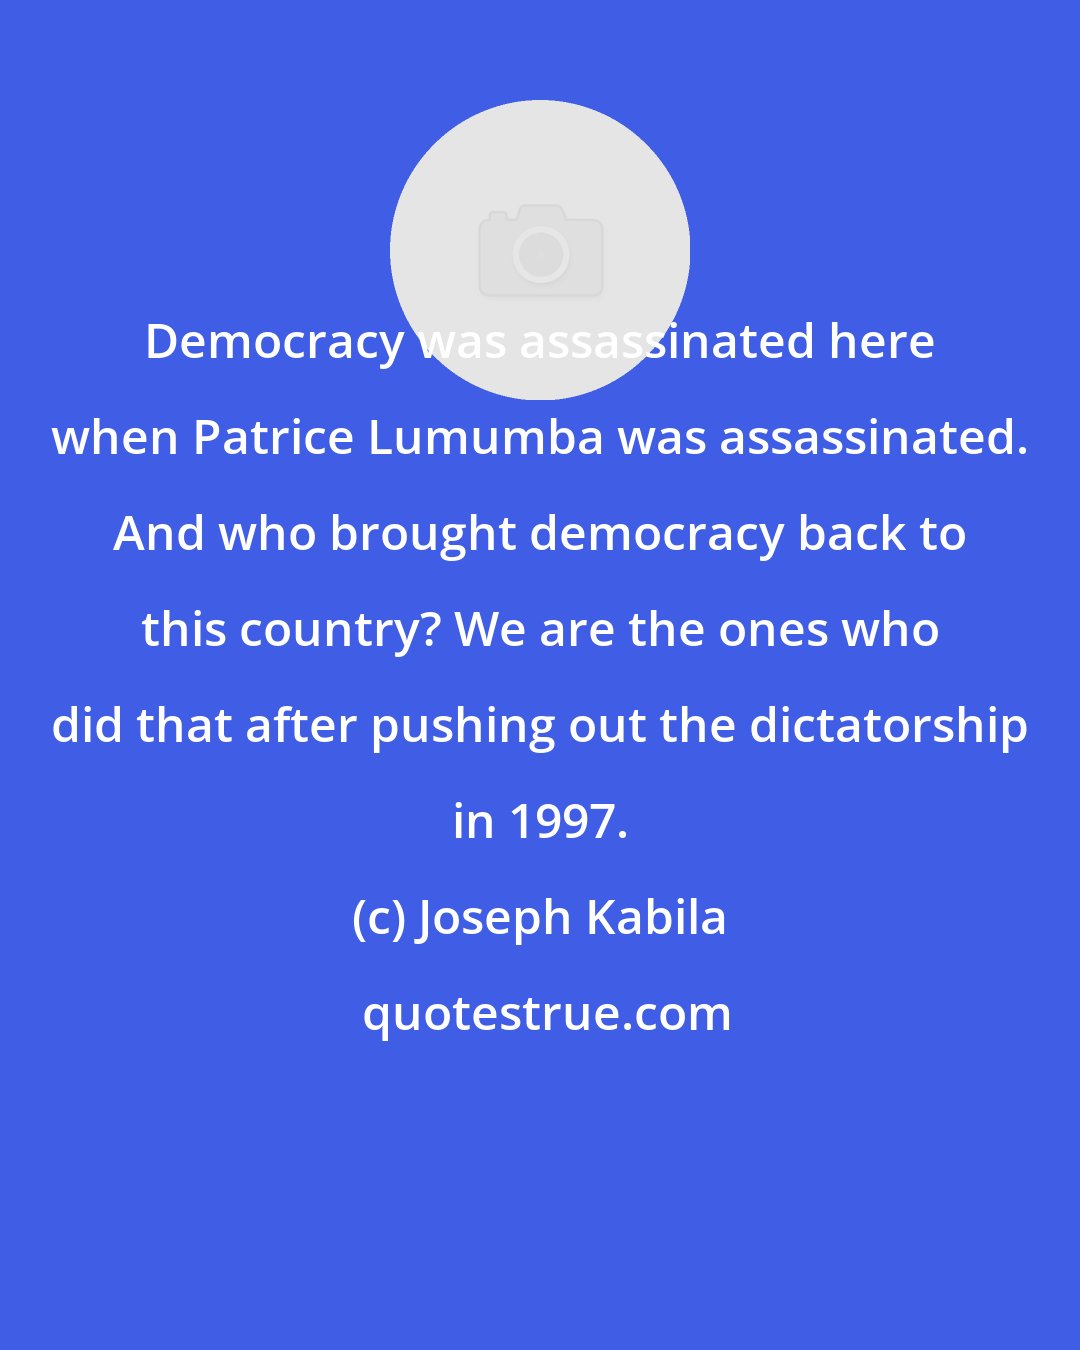 Joseph Kabila: Democracy was assassinated here when Patrice Lumumba was assassinated. And who brought democracy back to this country? We are the ones who did that after pushing out the dictatorship in 1997.